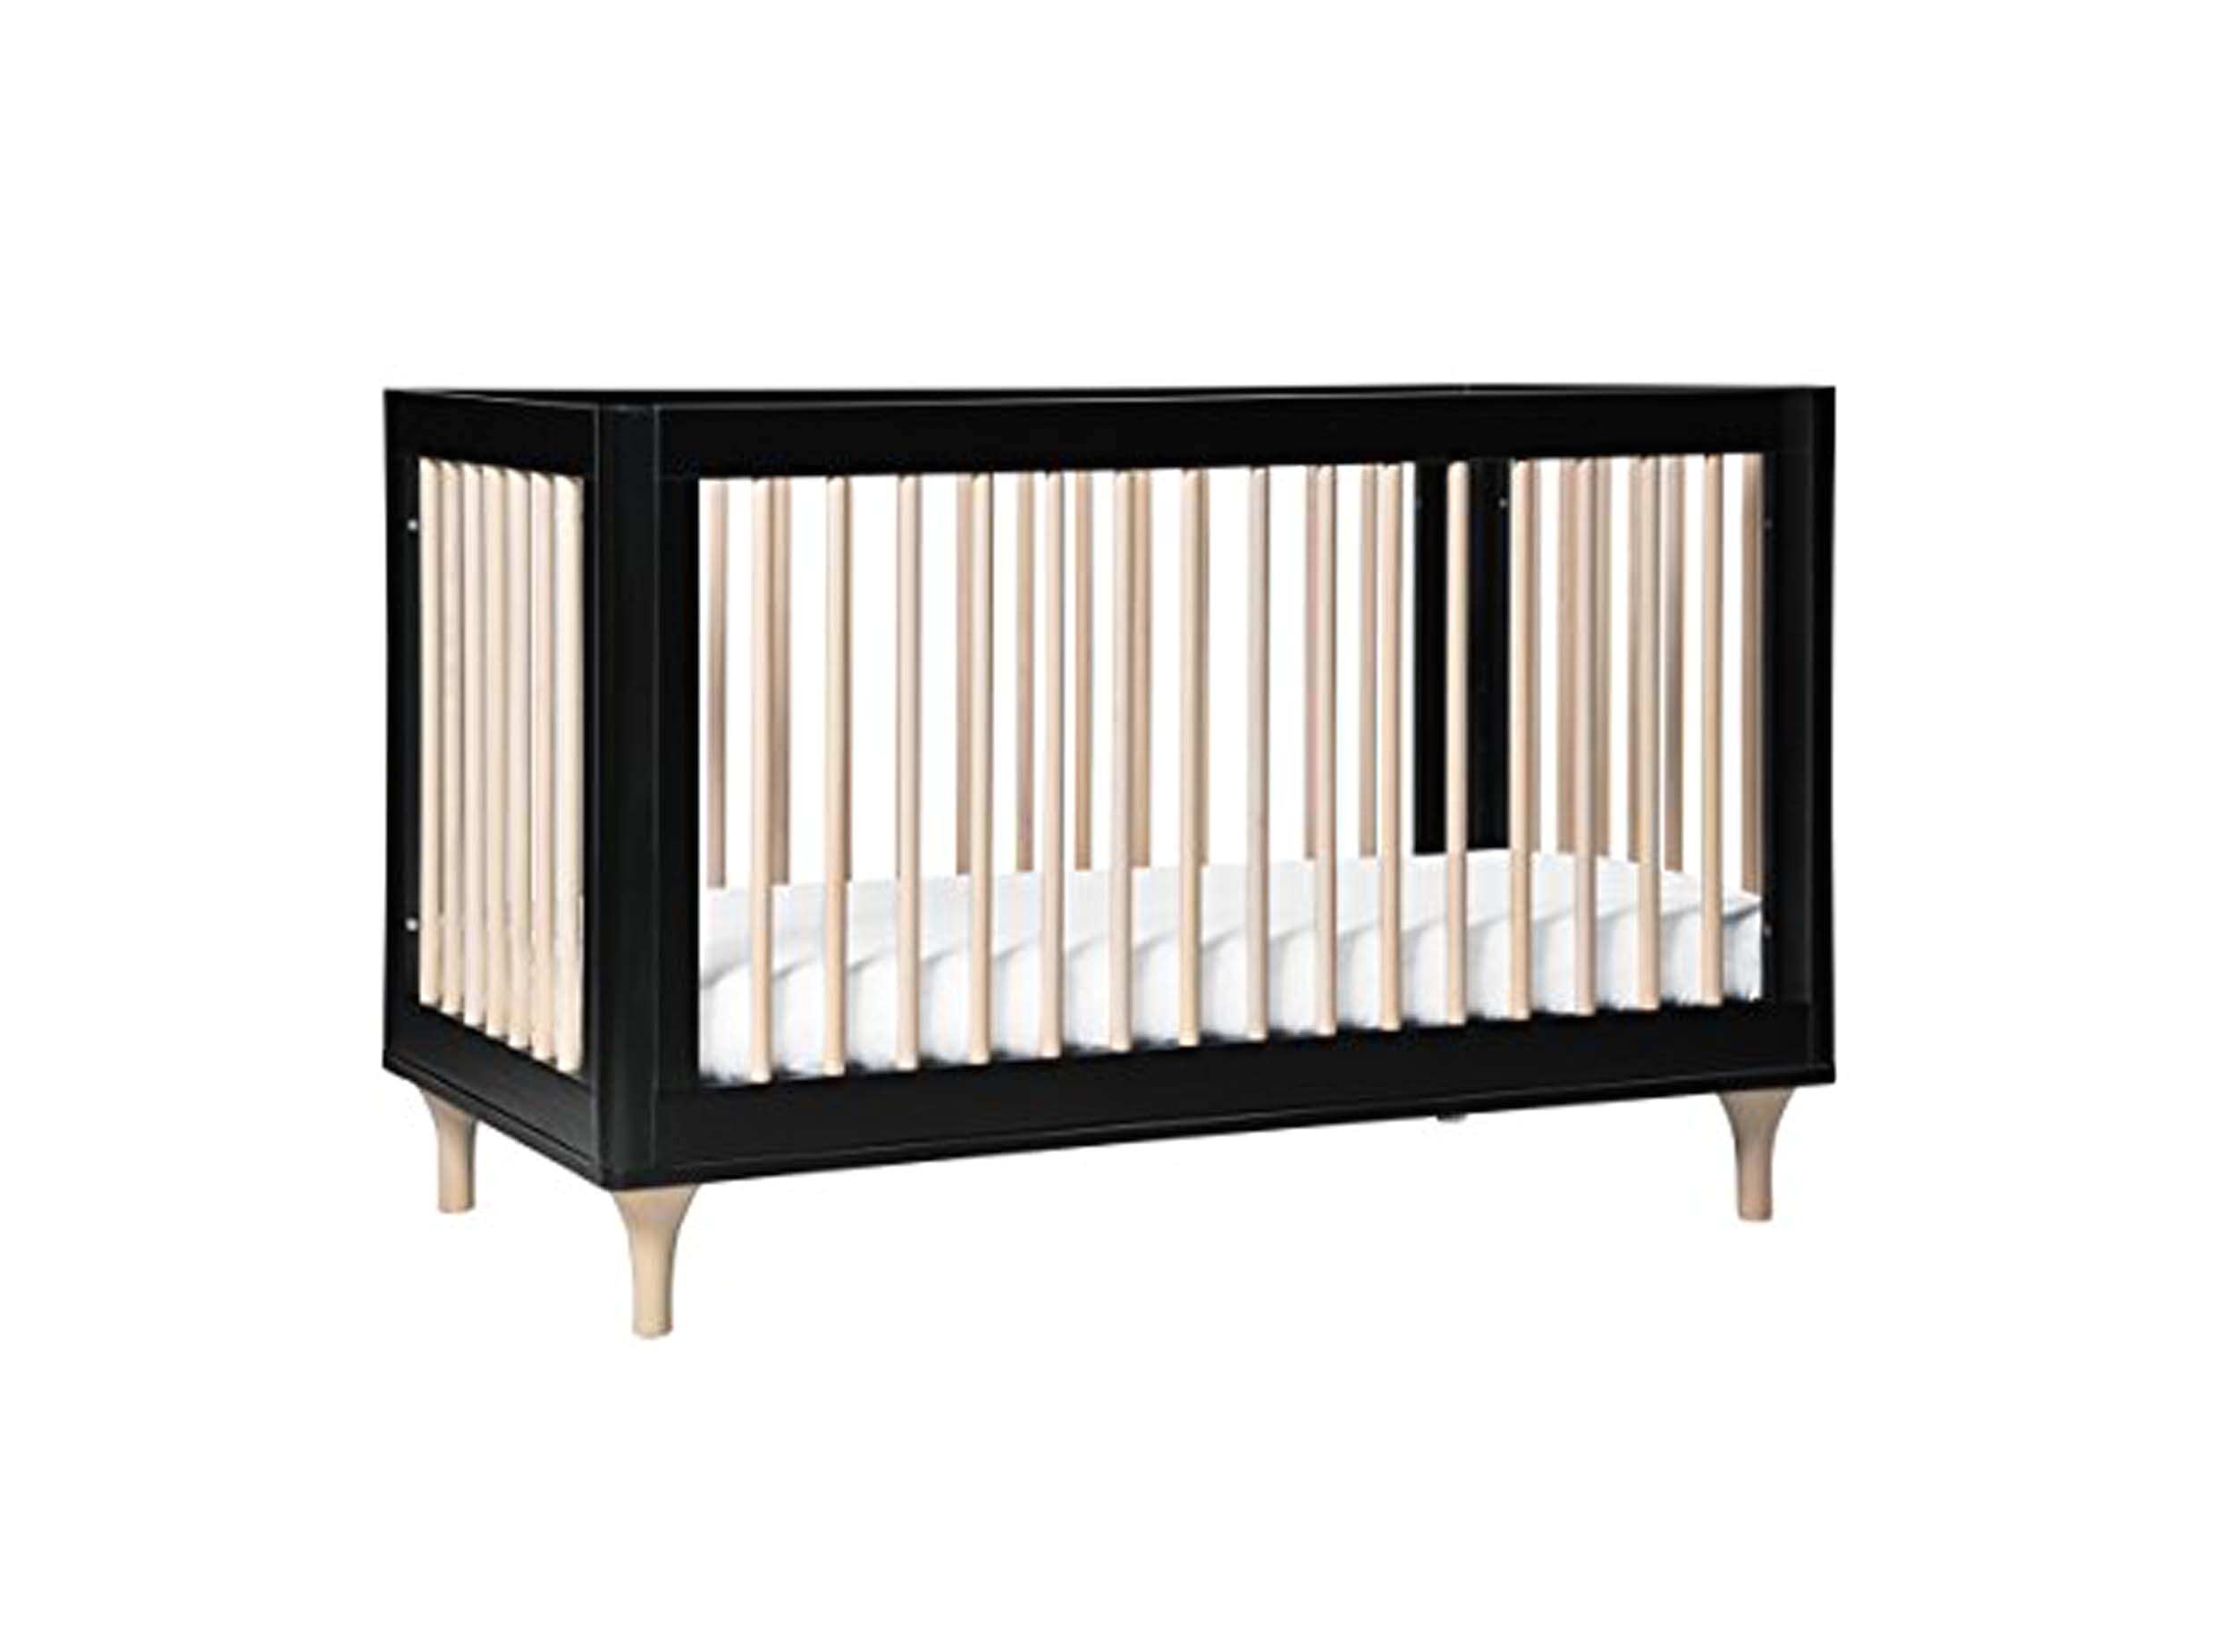 buy nowreview a babyletto lolly 3 in 1 convertible crib with free toddler rail